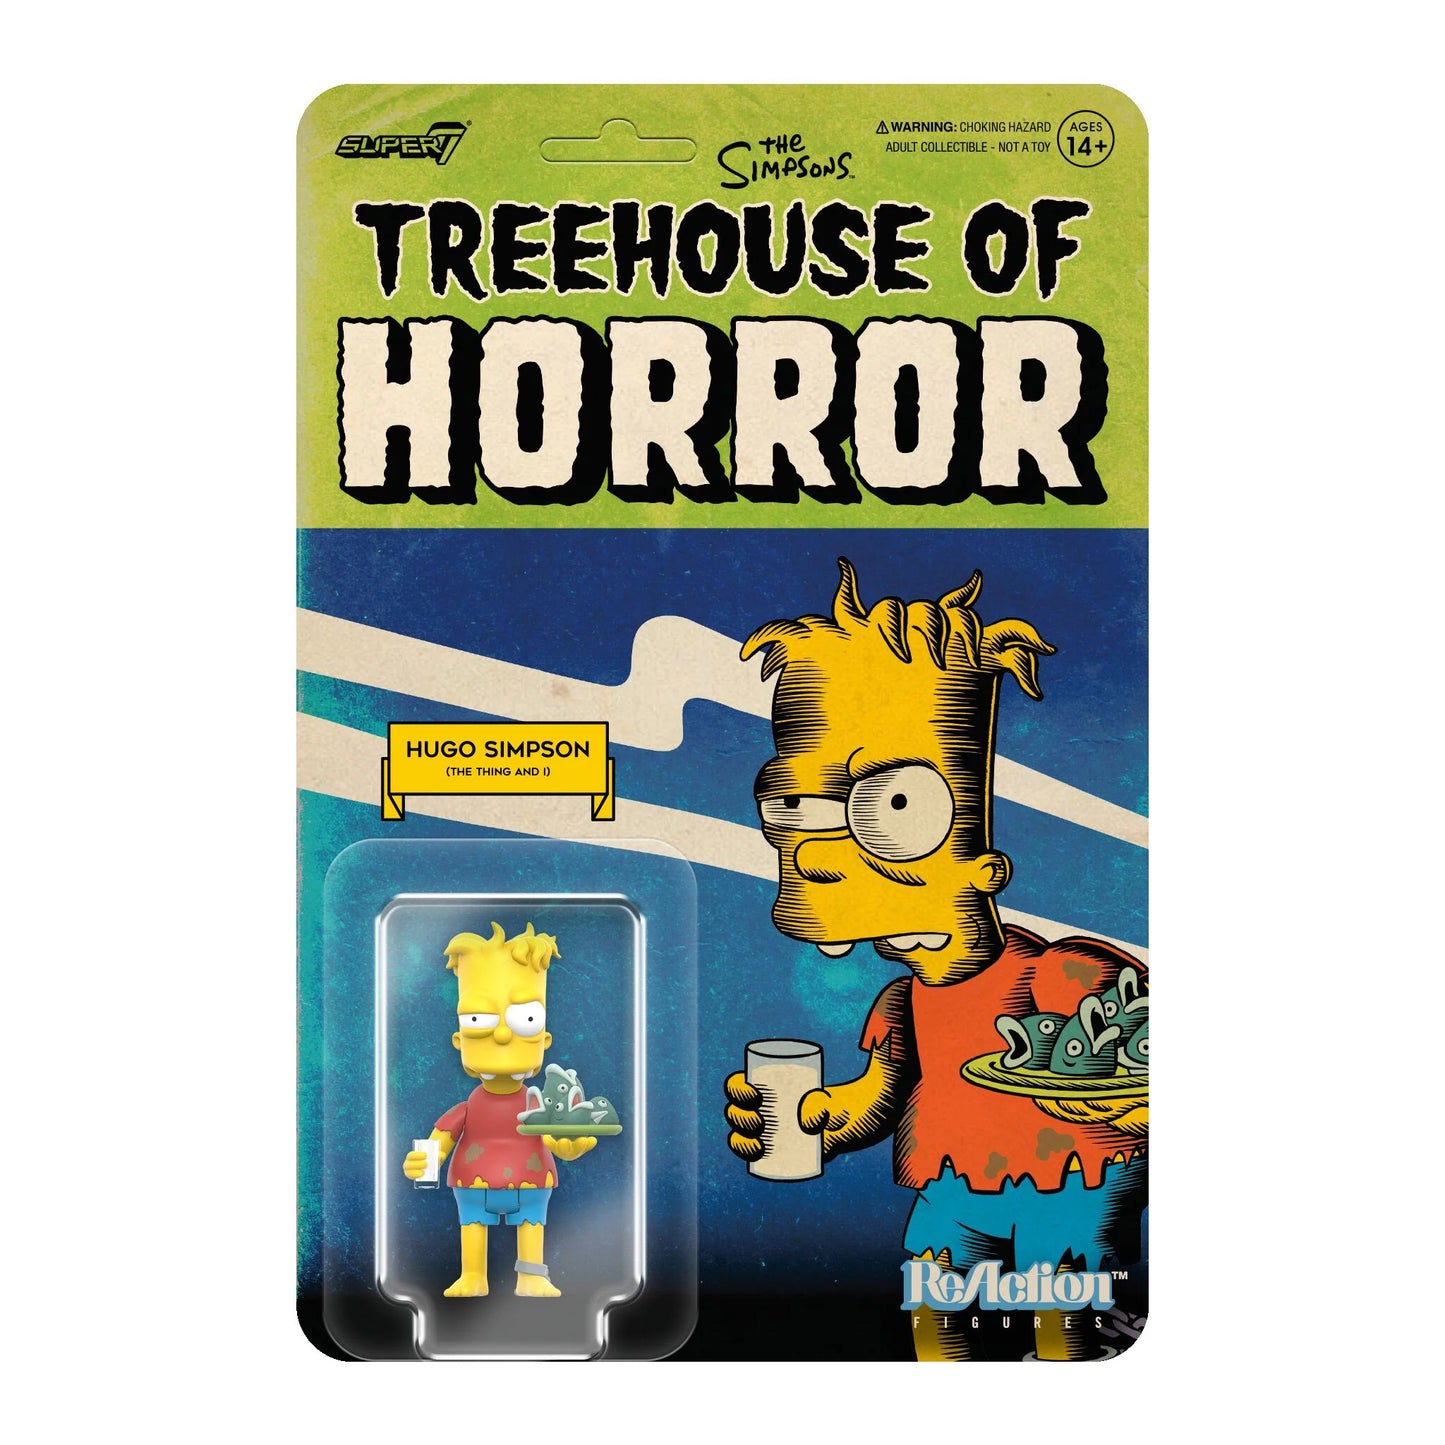 The Simpsons: Treehouse of Horror - Hugo Simpson - ReAction Figure by Super 7 (Cartoon)